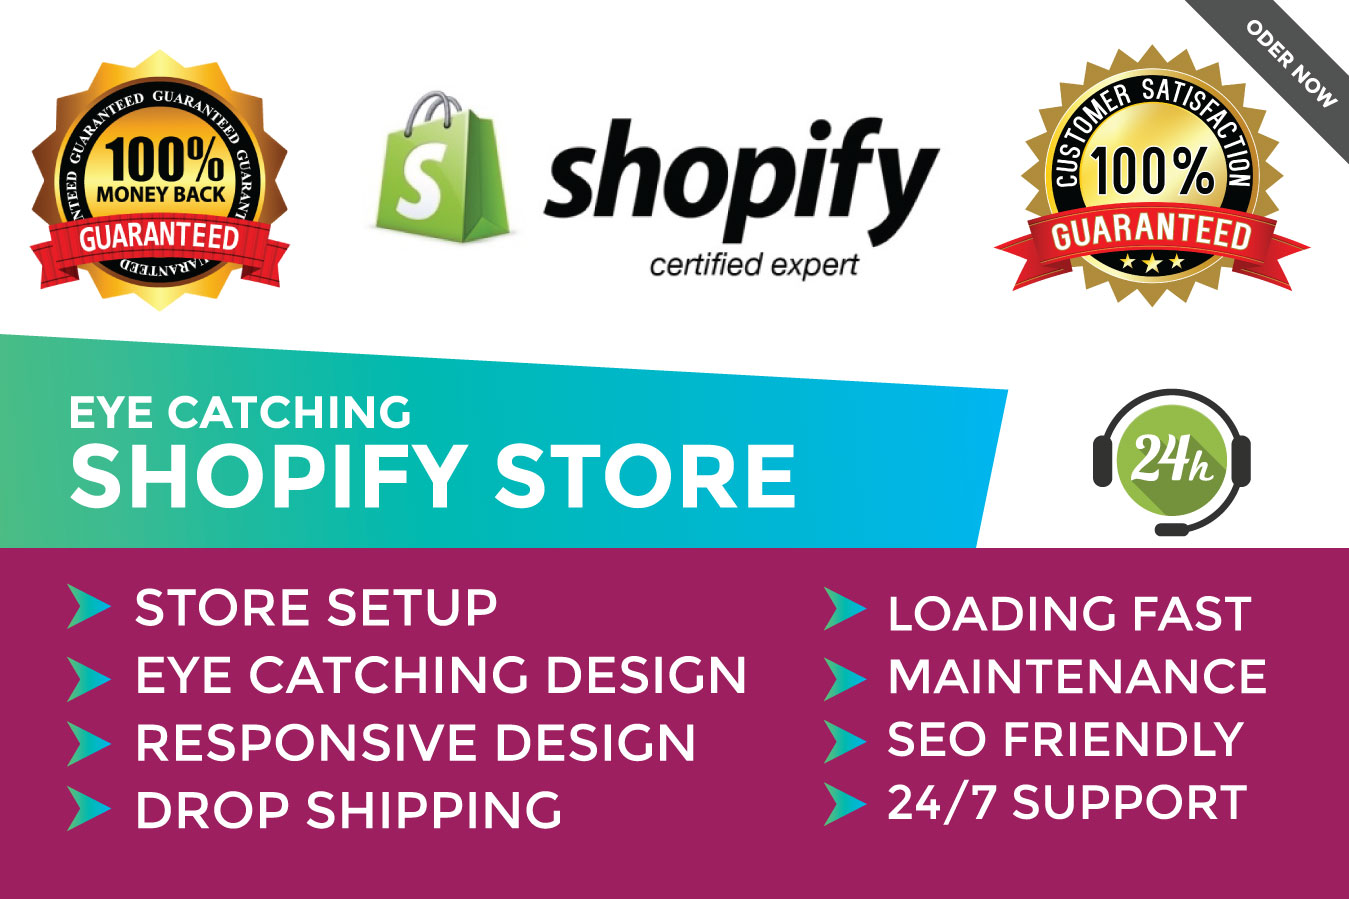 design shopify store, create shopify website for $125 - SEOClerks